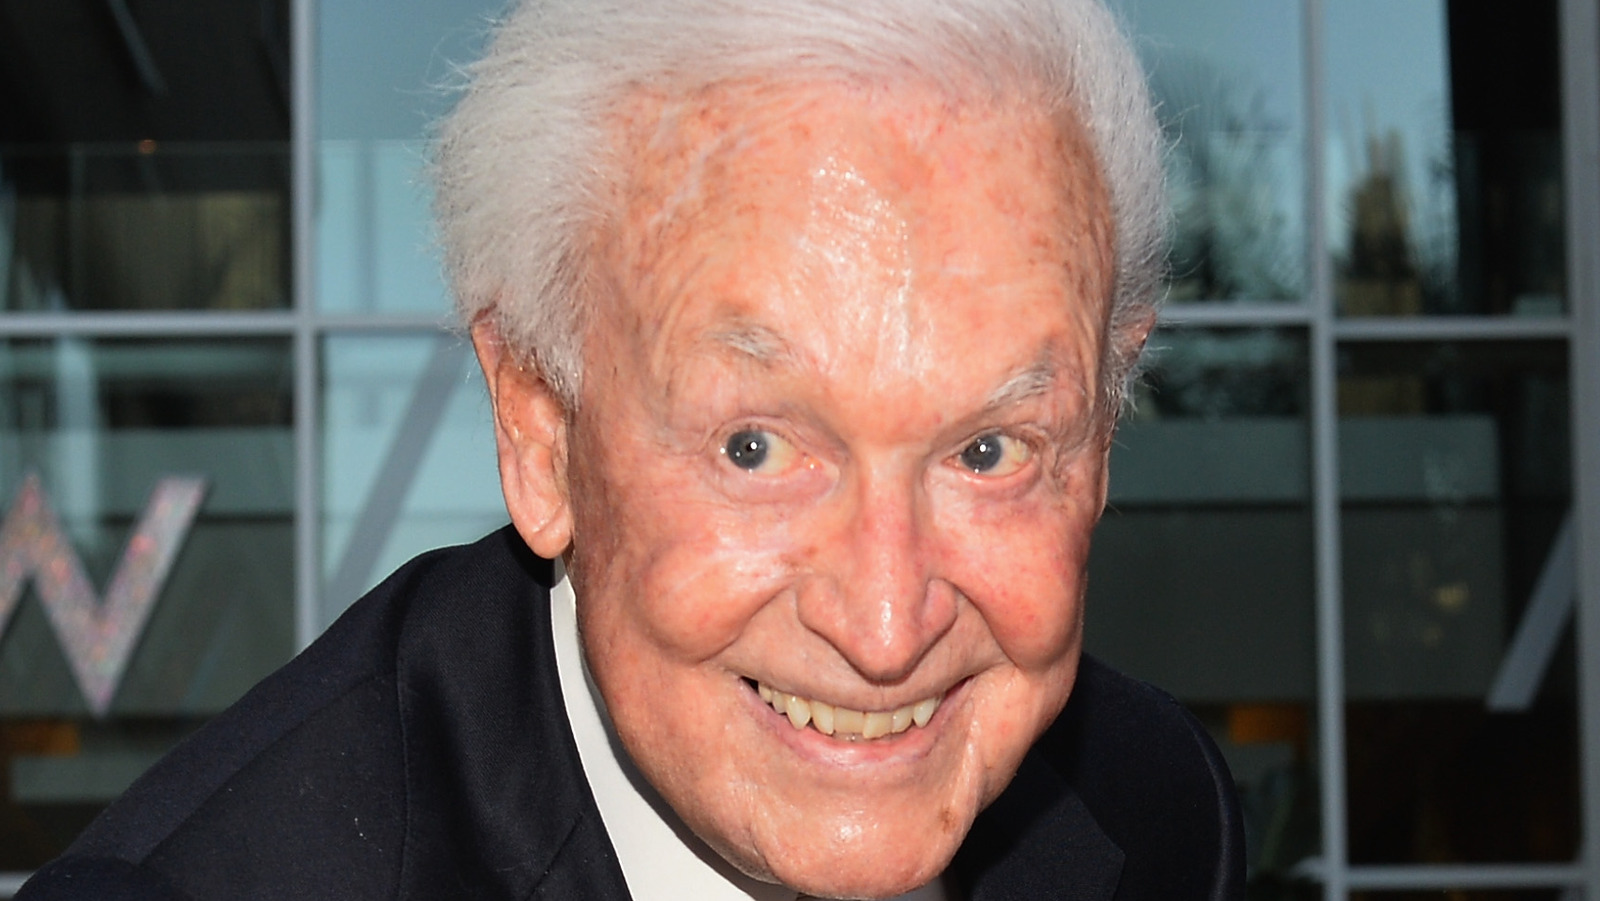 Bob Barker's Net Worth: How Much Is The Former Price Is Right Host Worth?